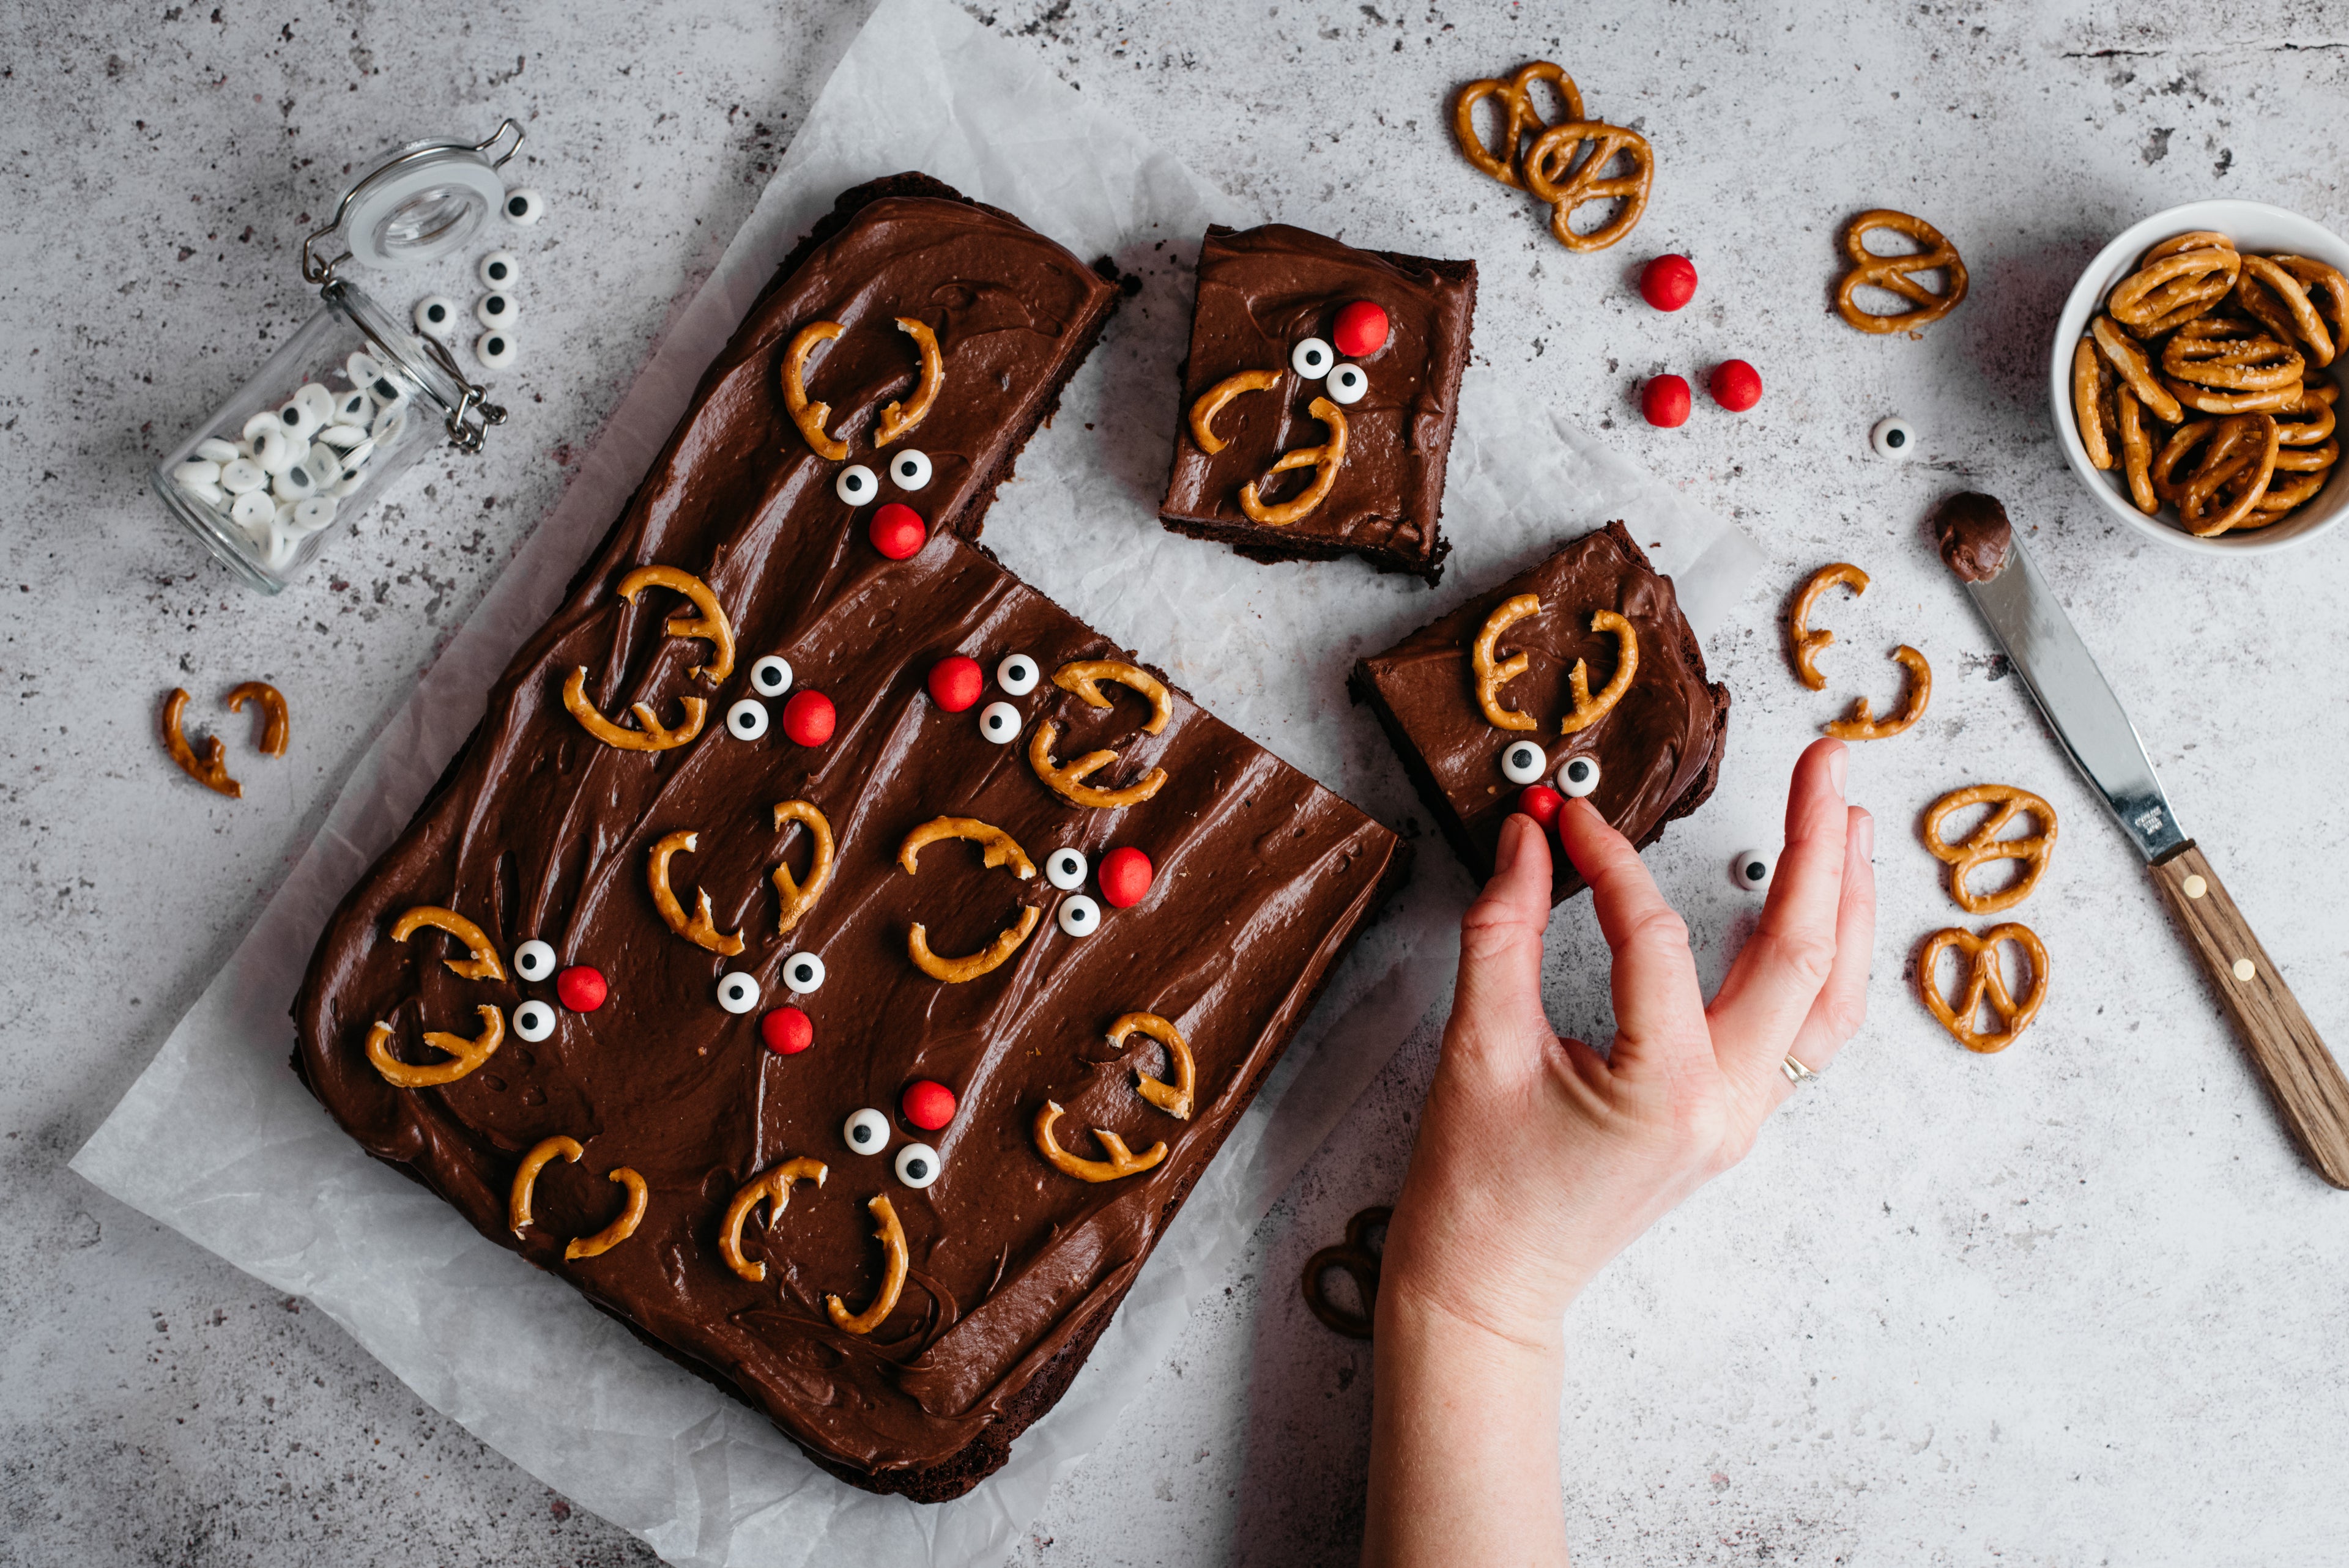 Top view of Chocolate & Caramel Reindeer Traybake with a hand reaching to decorate with red sweets. Next to a bowl of pretzels